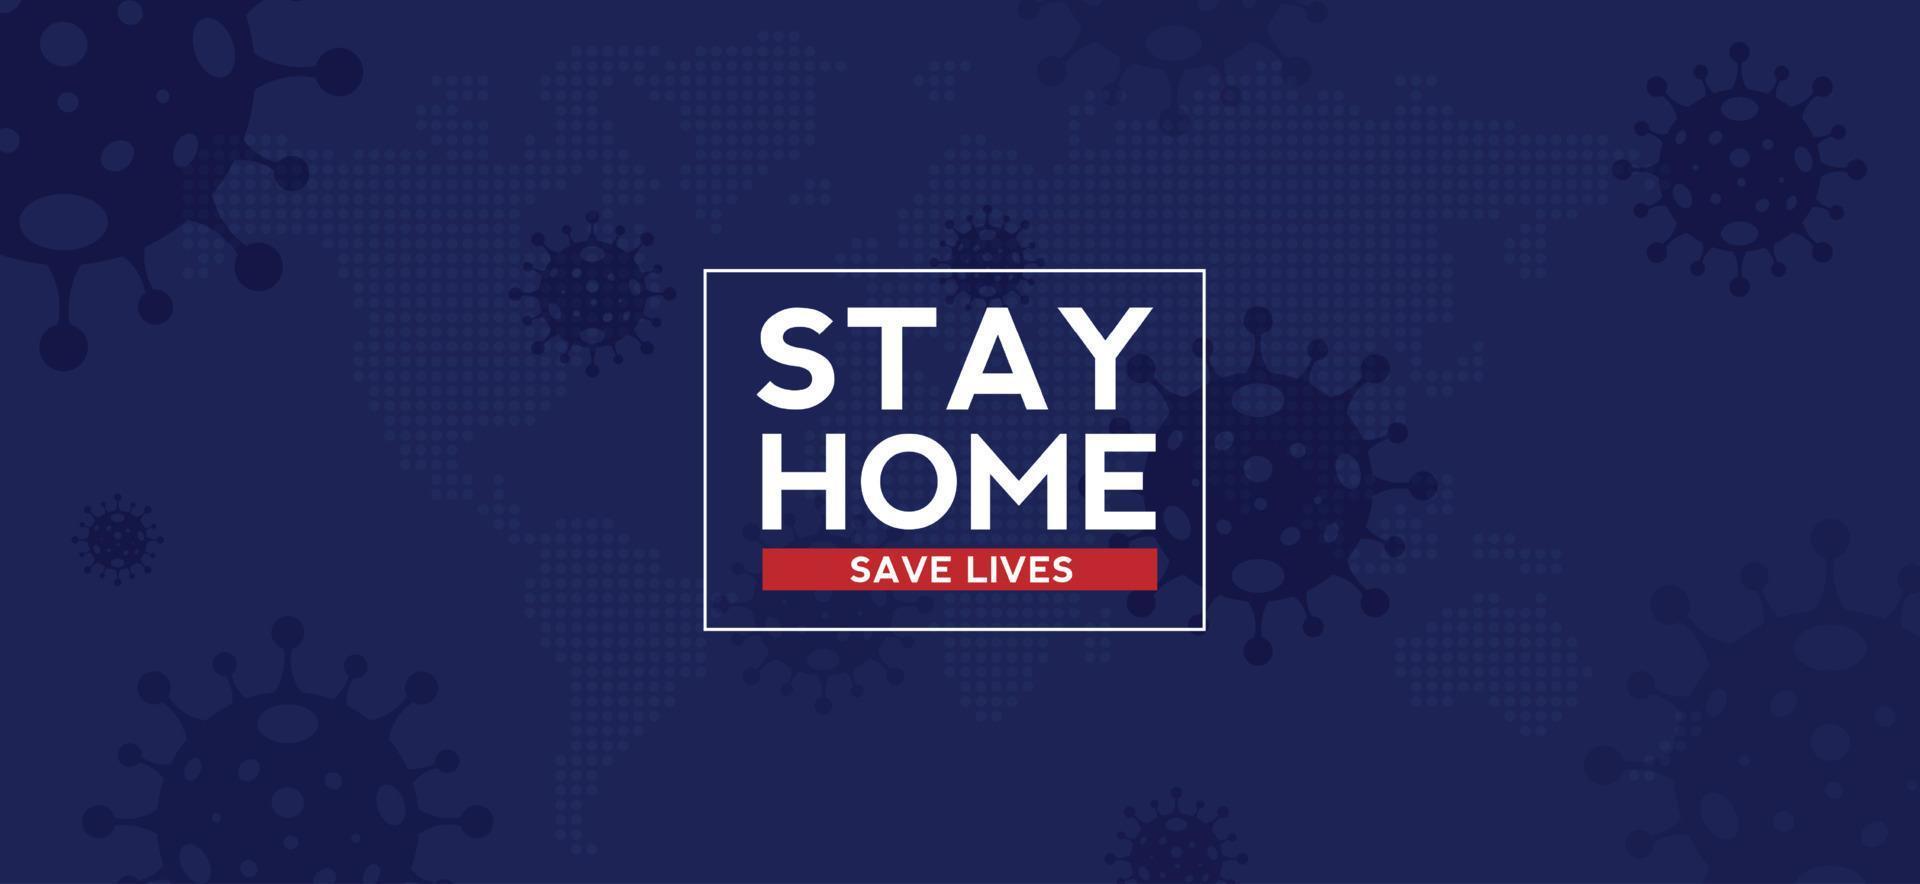 Stay at home quarantine and warning, stop coronavirus COVID-19 spreading. safe lettering typography poster with text logo, ash tag or hashtag. Virus vector illustration